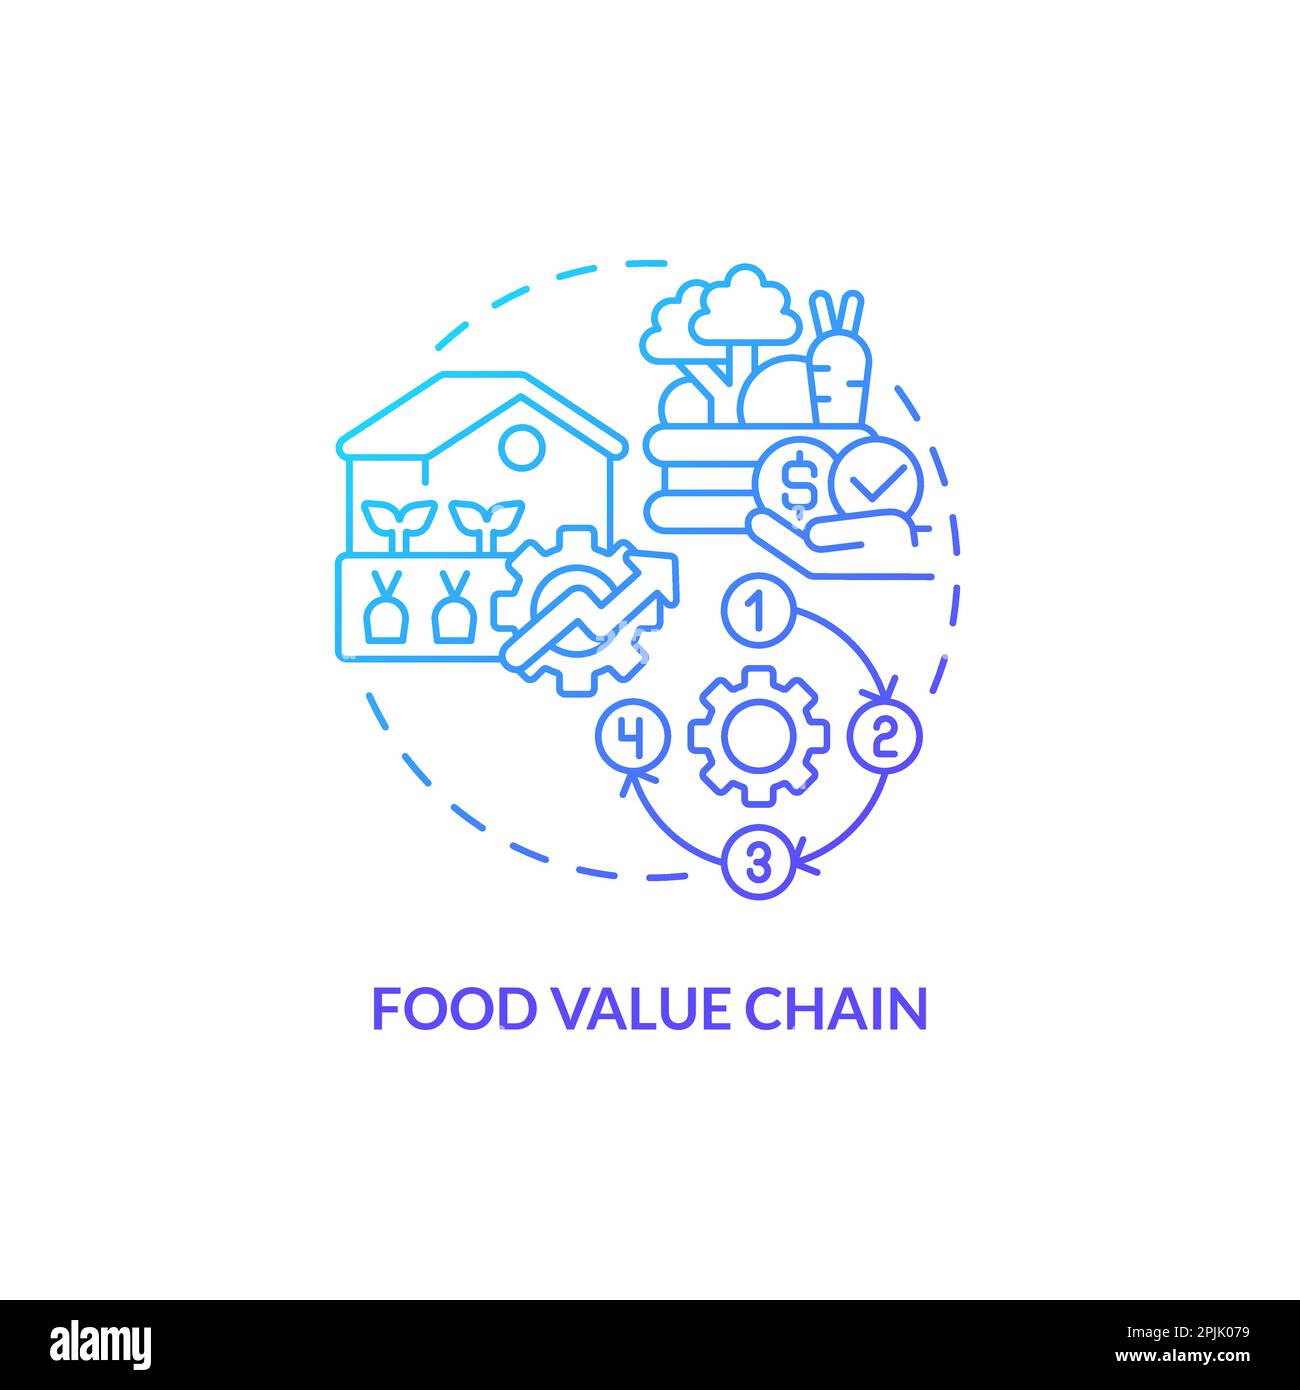 Food value chain blue gradient concept icon Stock Vector